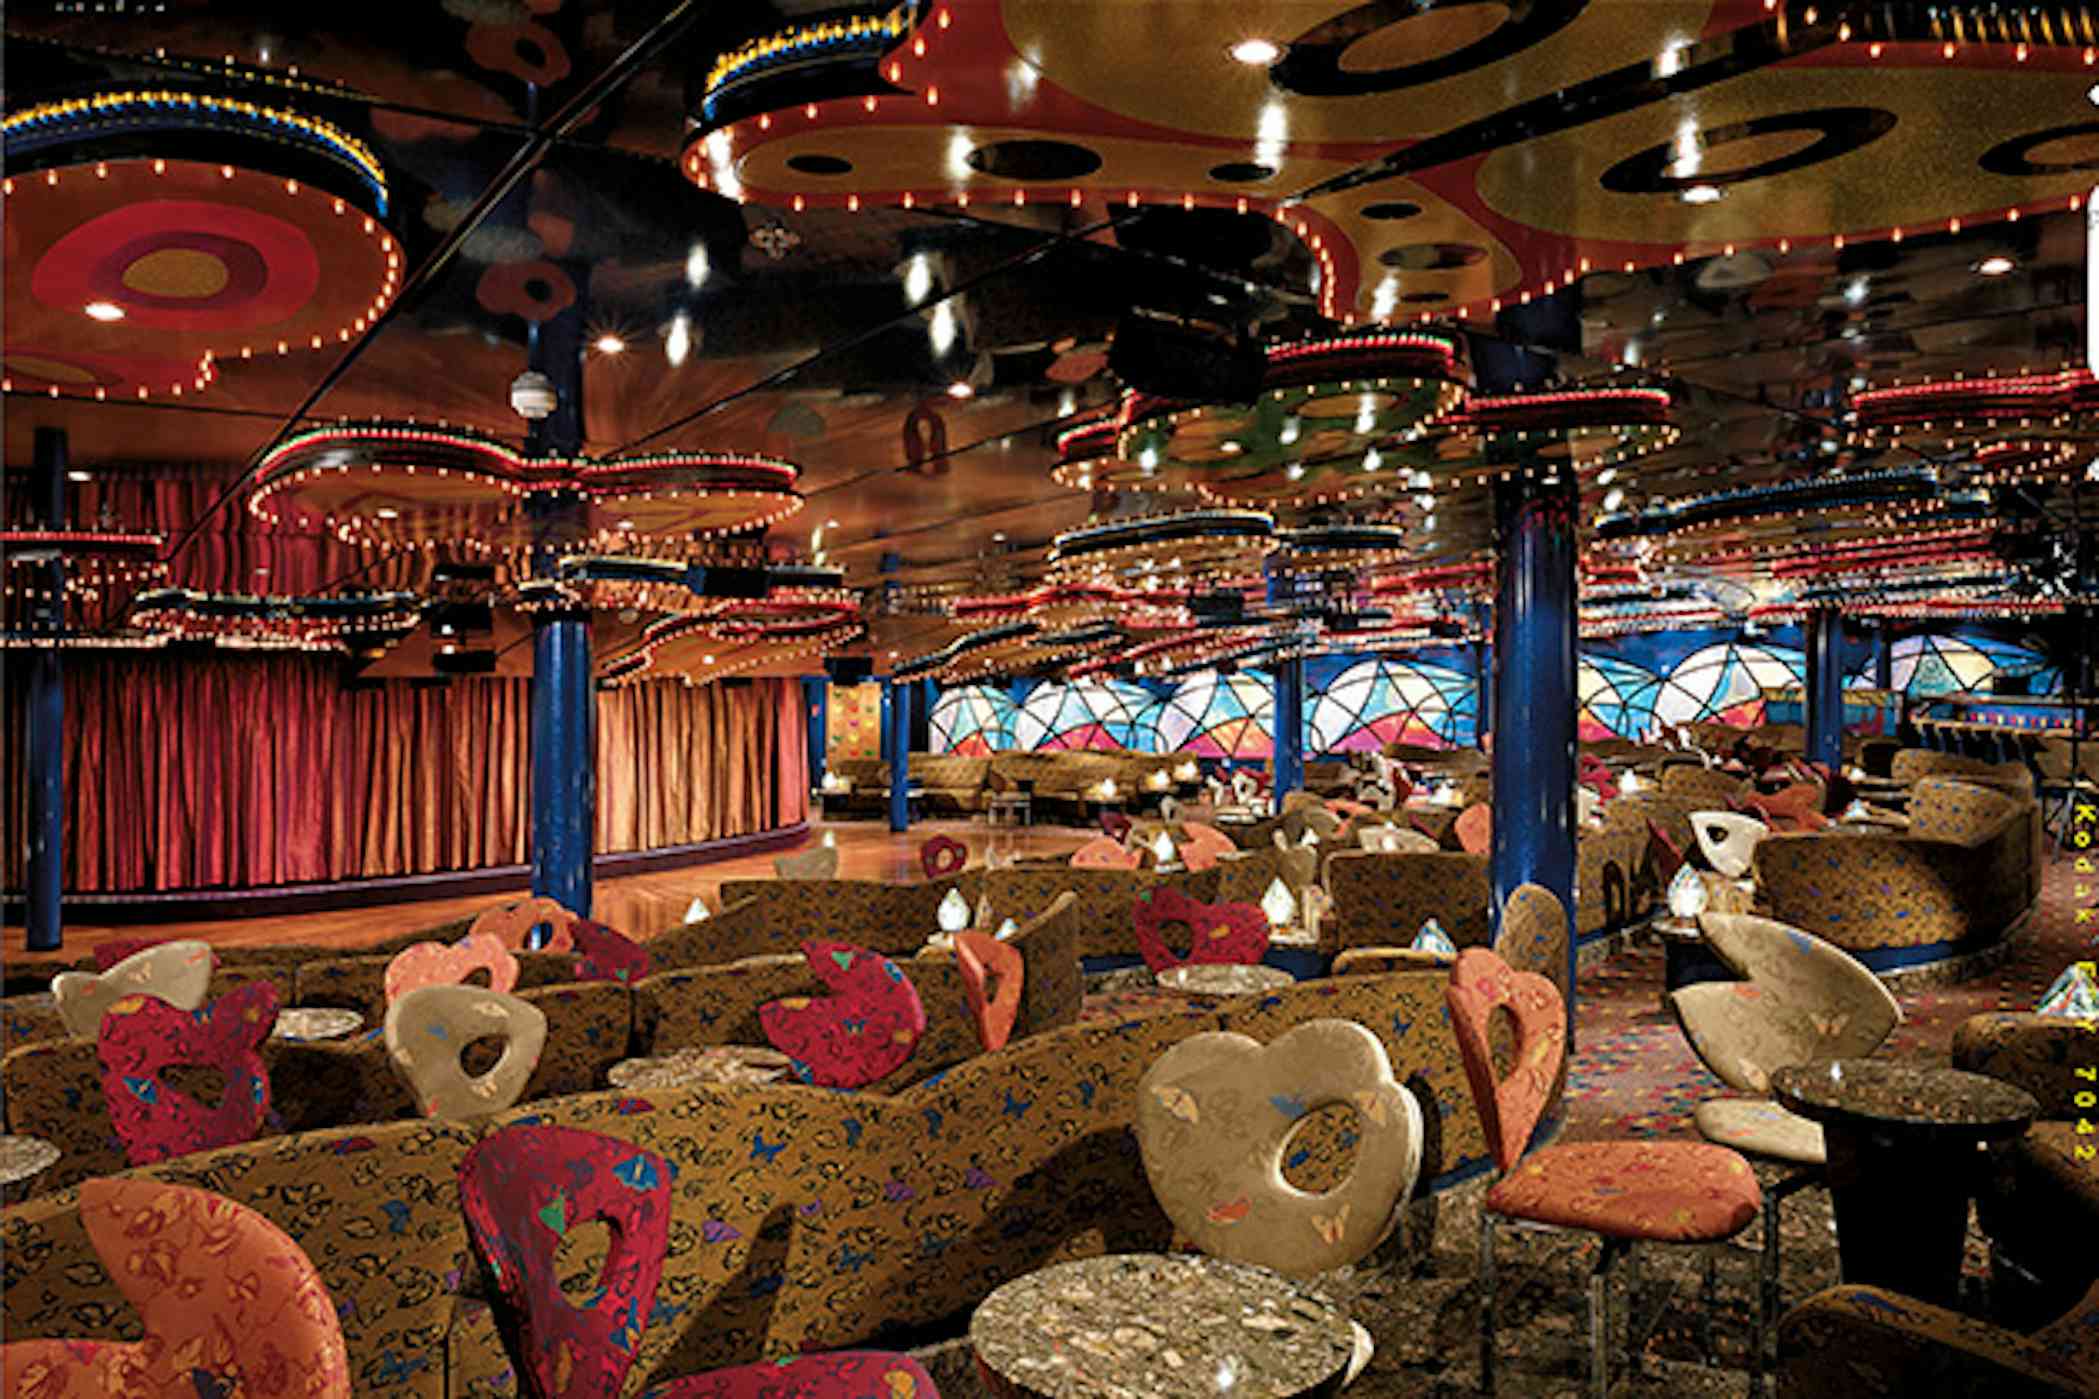 6 Ships With Over-the-Top Cruise Ship Decor